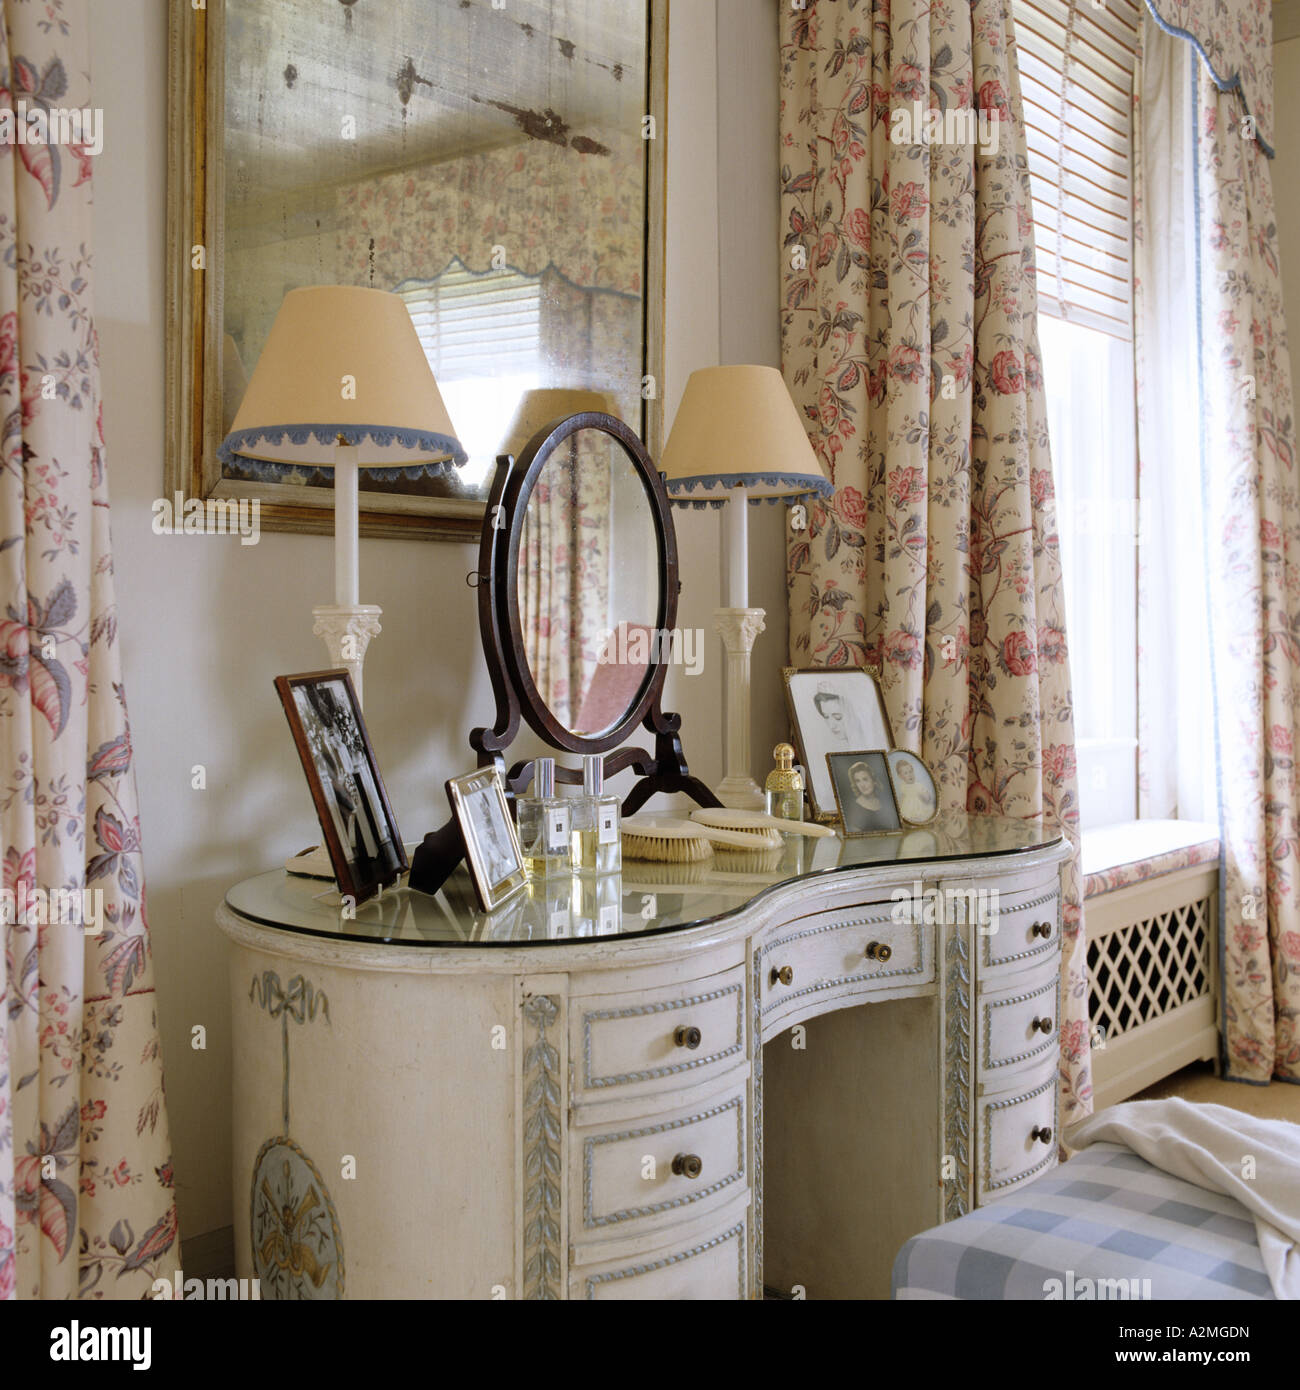 Dressing table and floral patterned curtains in bedroom of English country house Stock Photo